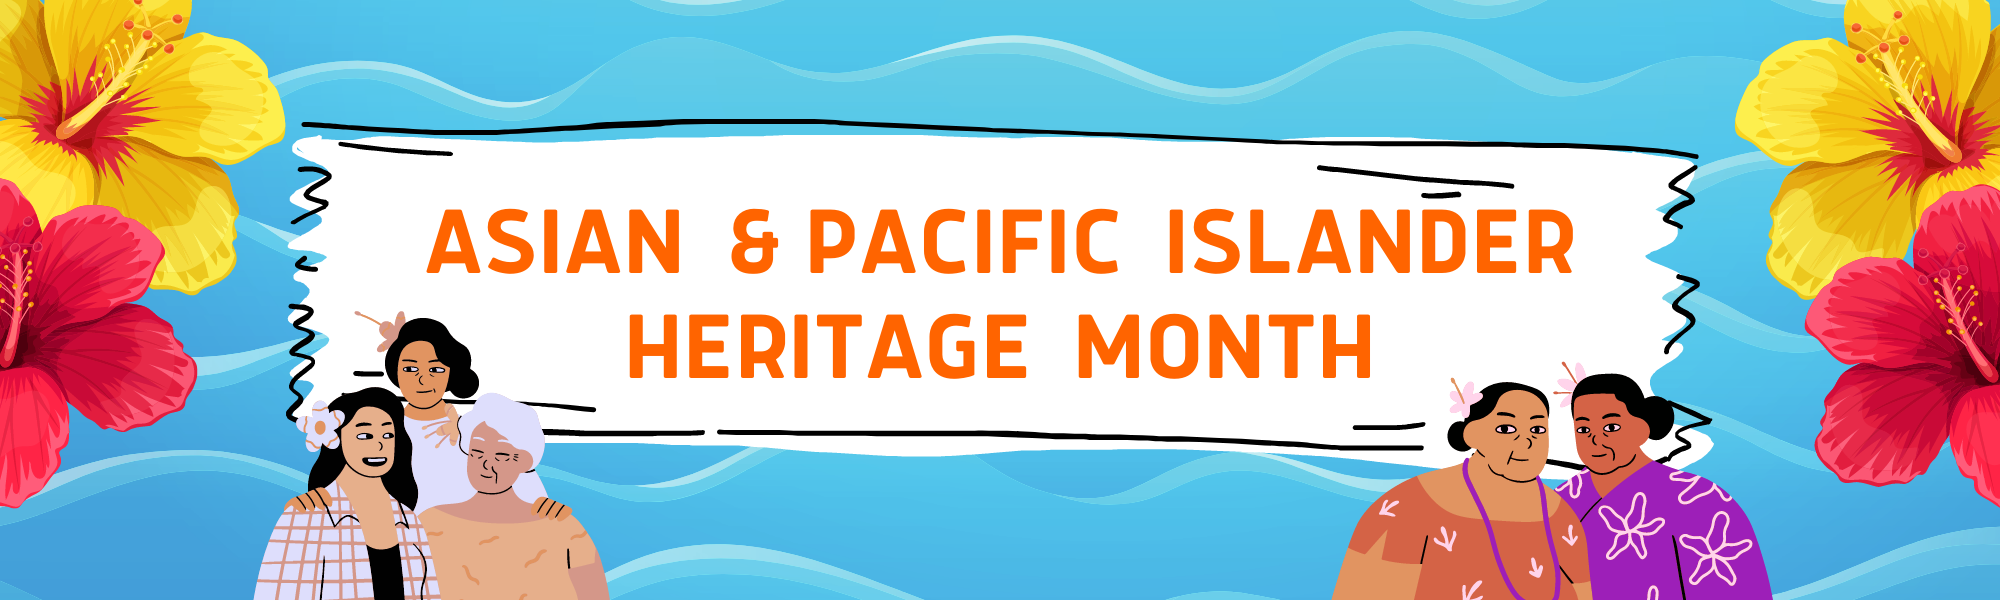 Asian and Pacific Islander Heritage Month